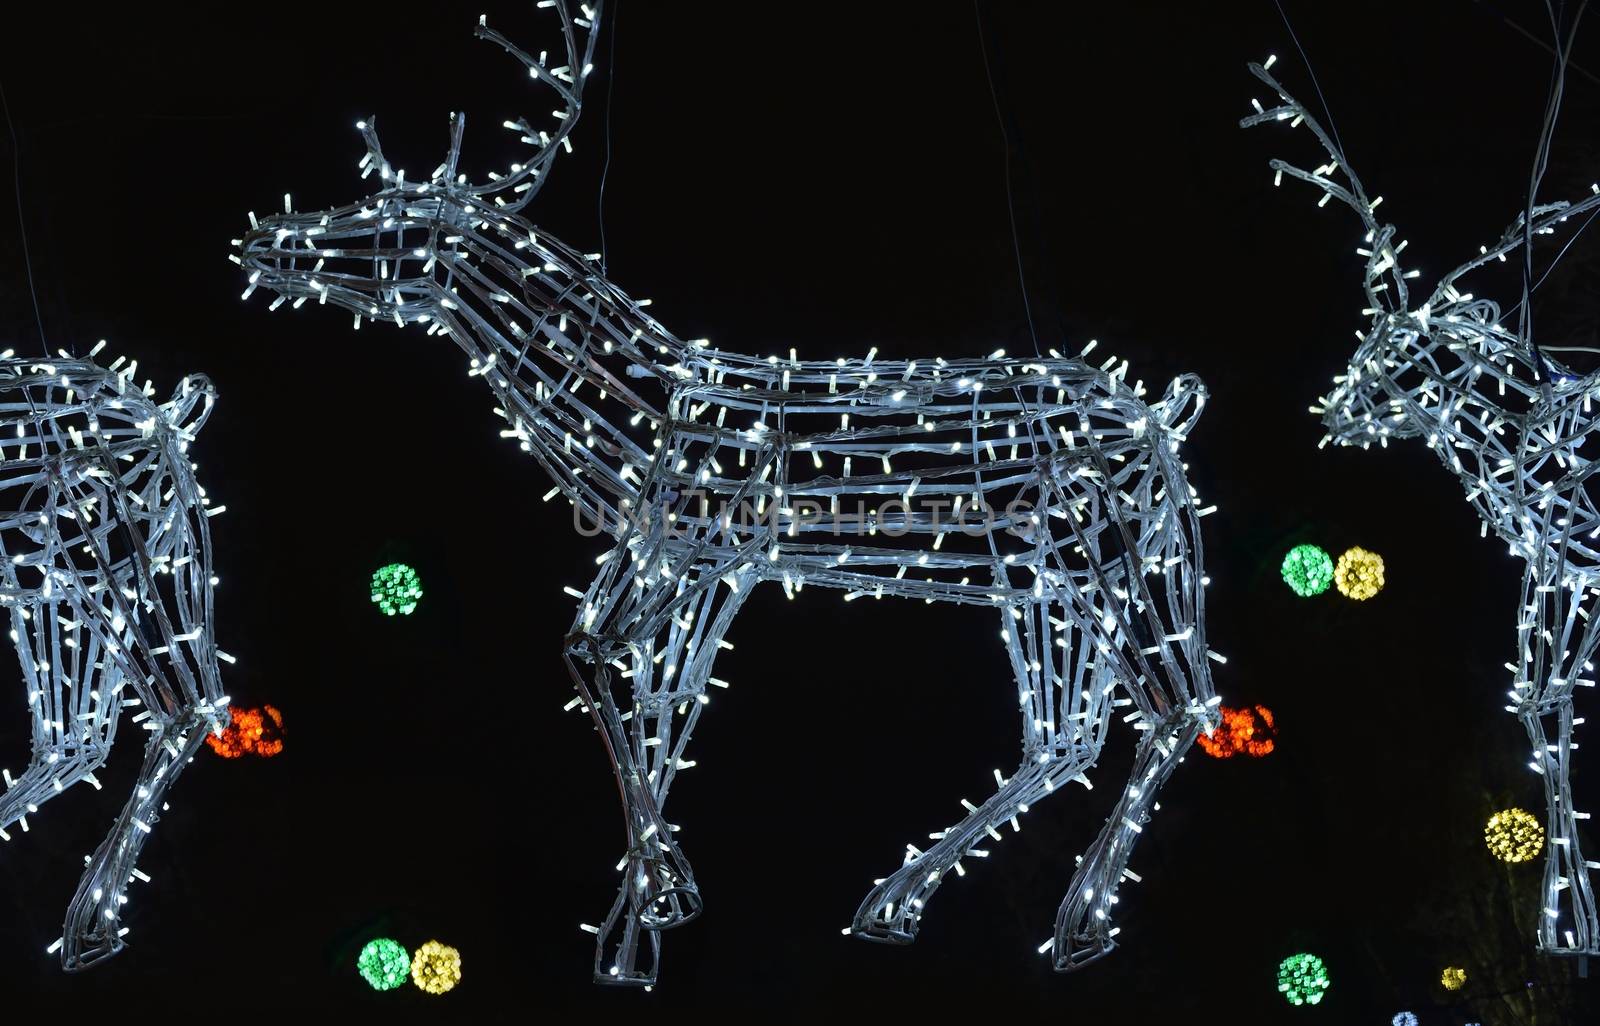 white glowing electronic deer in the sleigh of Santa Claus delivering gifts